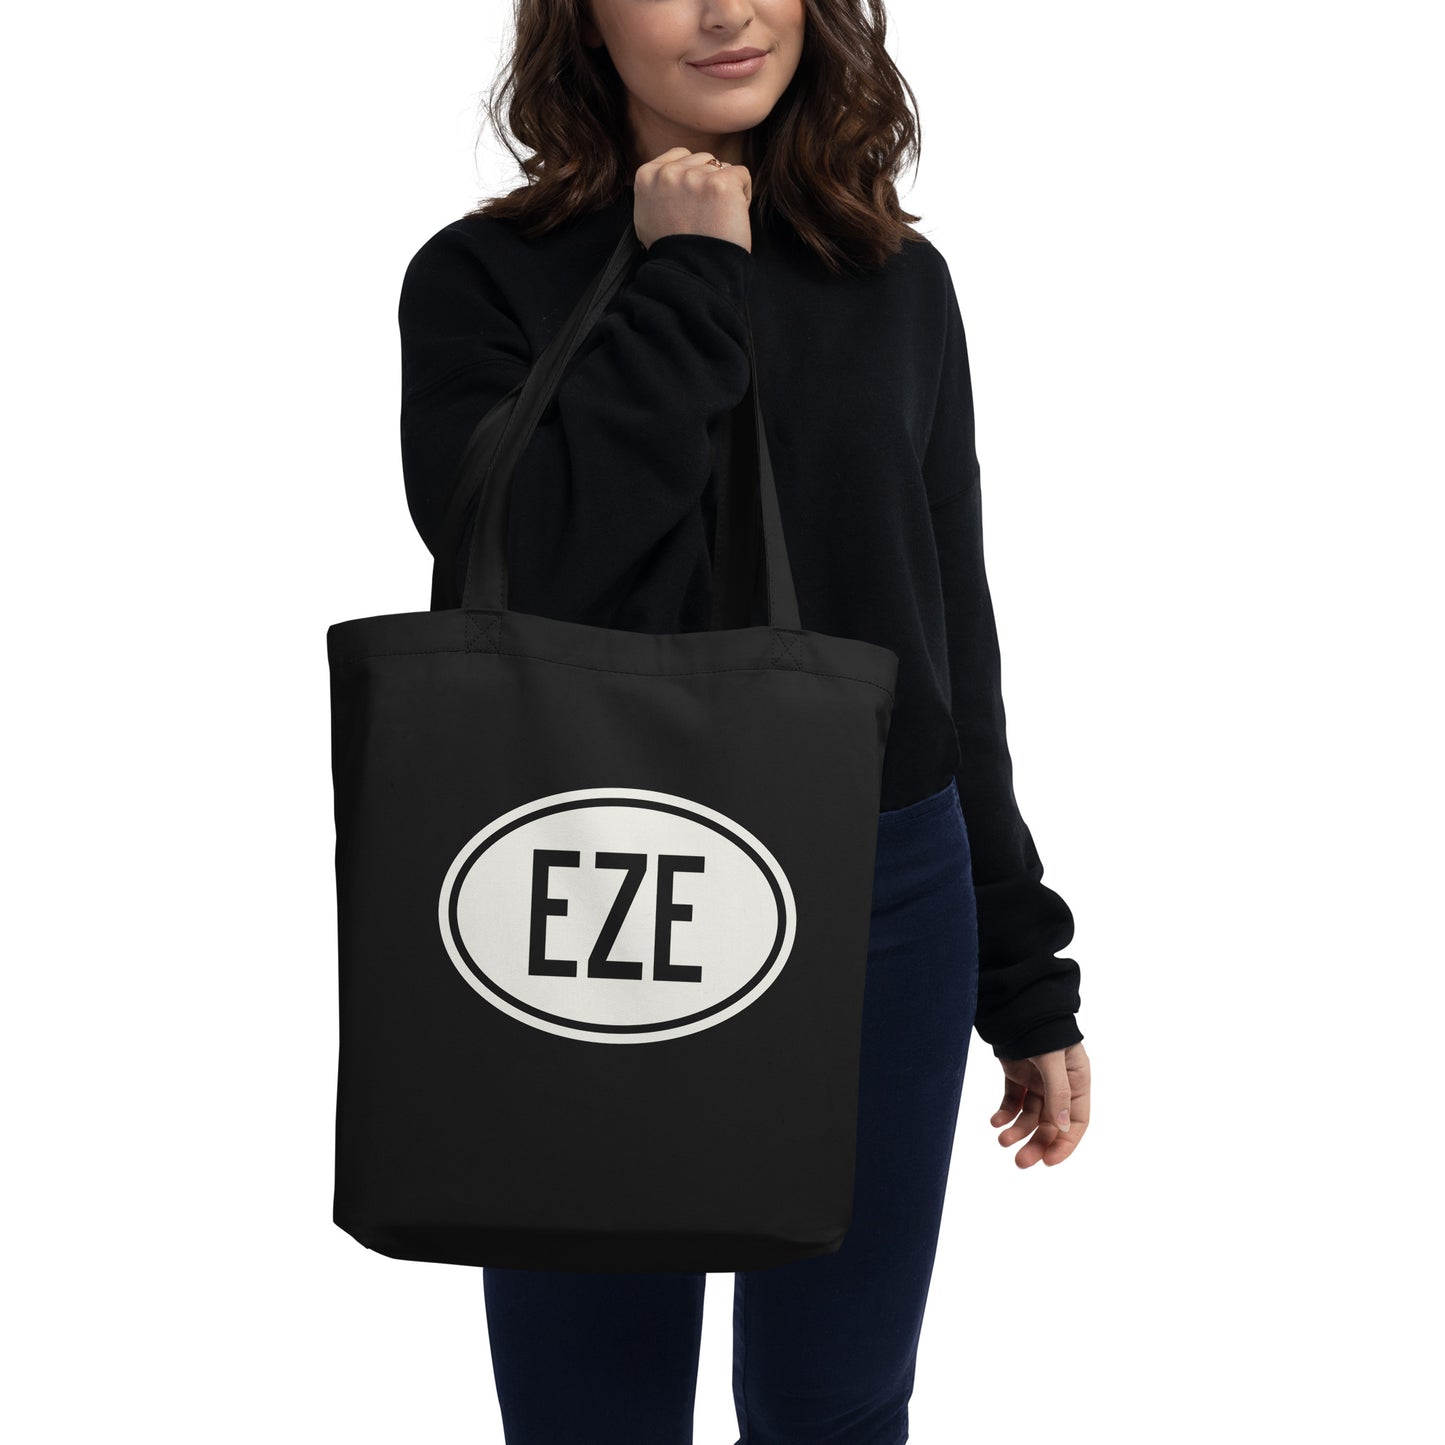 Unique Travel Gift Organic Tote - White Oval • EZE Buenos Aires • YHM Designs - Image 03